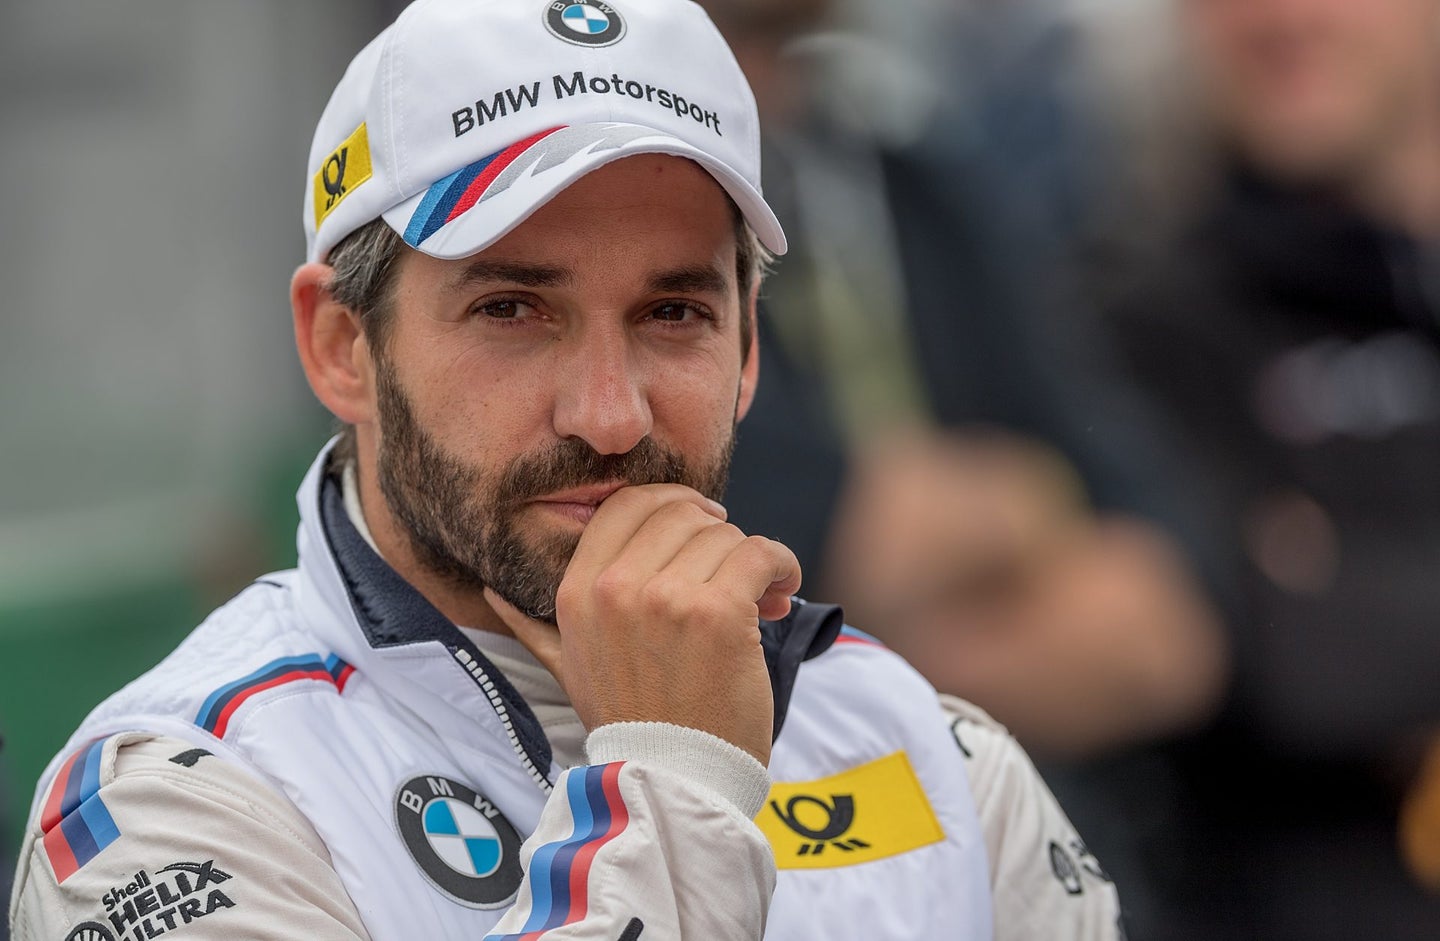 Timo Glock Seems to Have Forgotten When April Fools’ Day Is